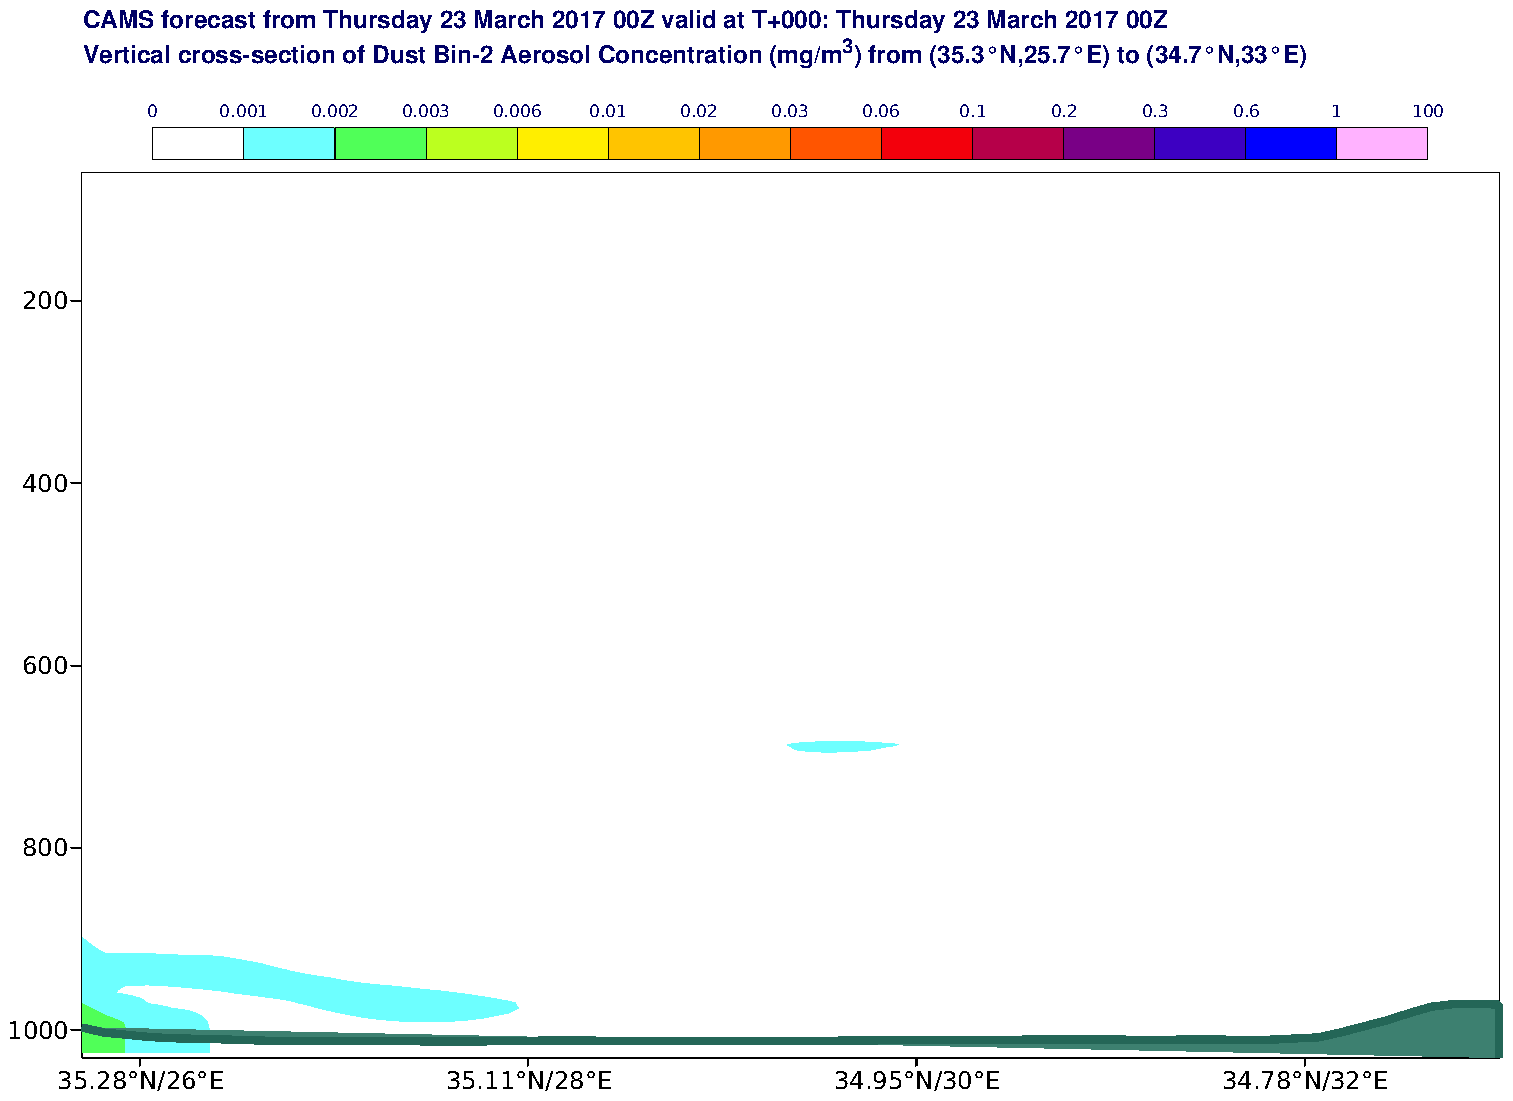 Vertical cross-section of Dust Bin-2 Aerosol Concentration (mg/m3) valid at T0 - 2017-03-23 00:00